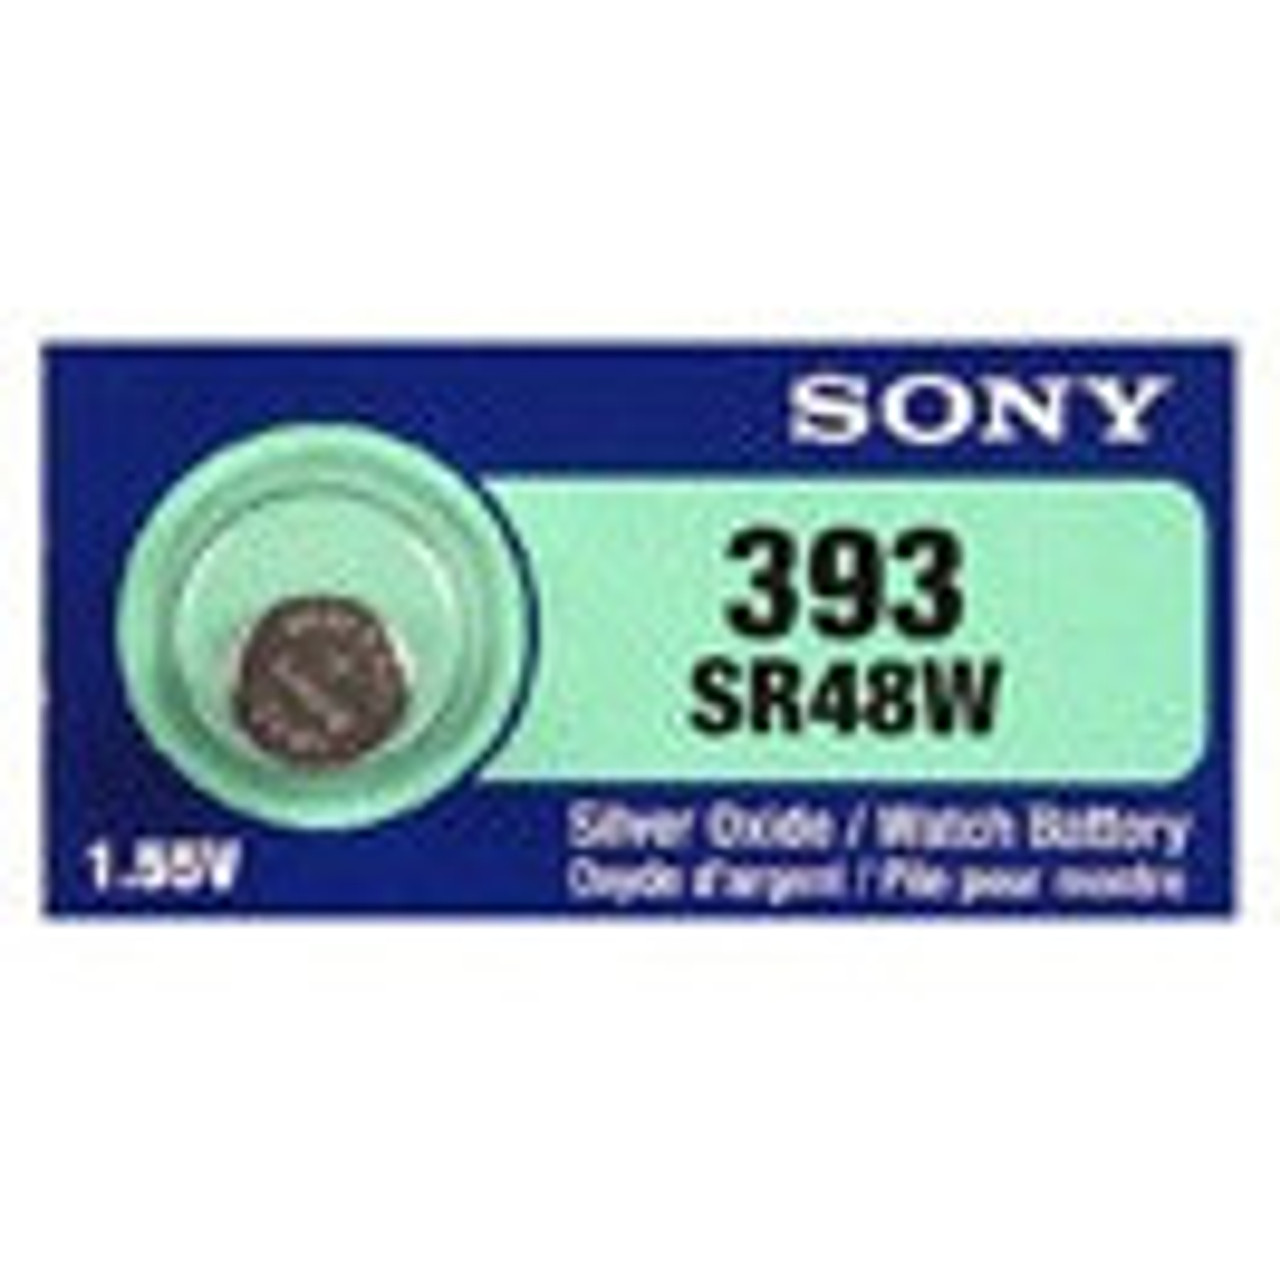 Sony Murata 309/393 - SR48 Silver Oxide Button Battery 1.55V - 5 Pack FREE SHIPPING